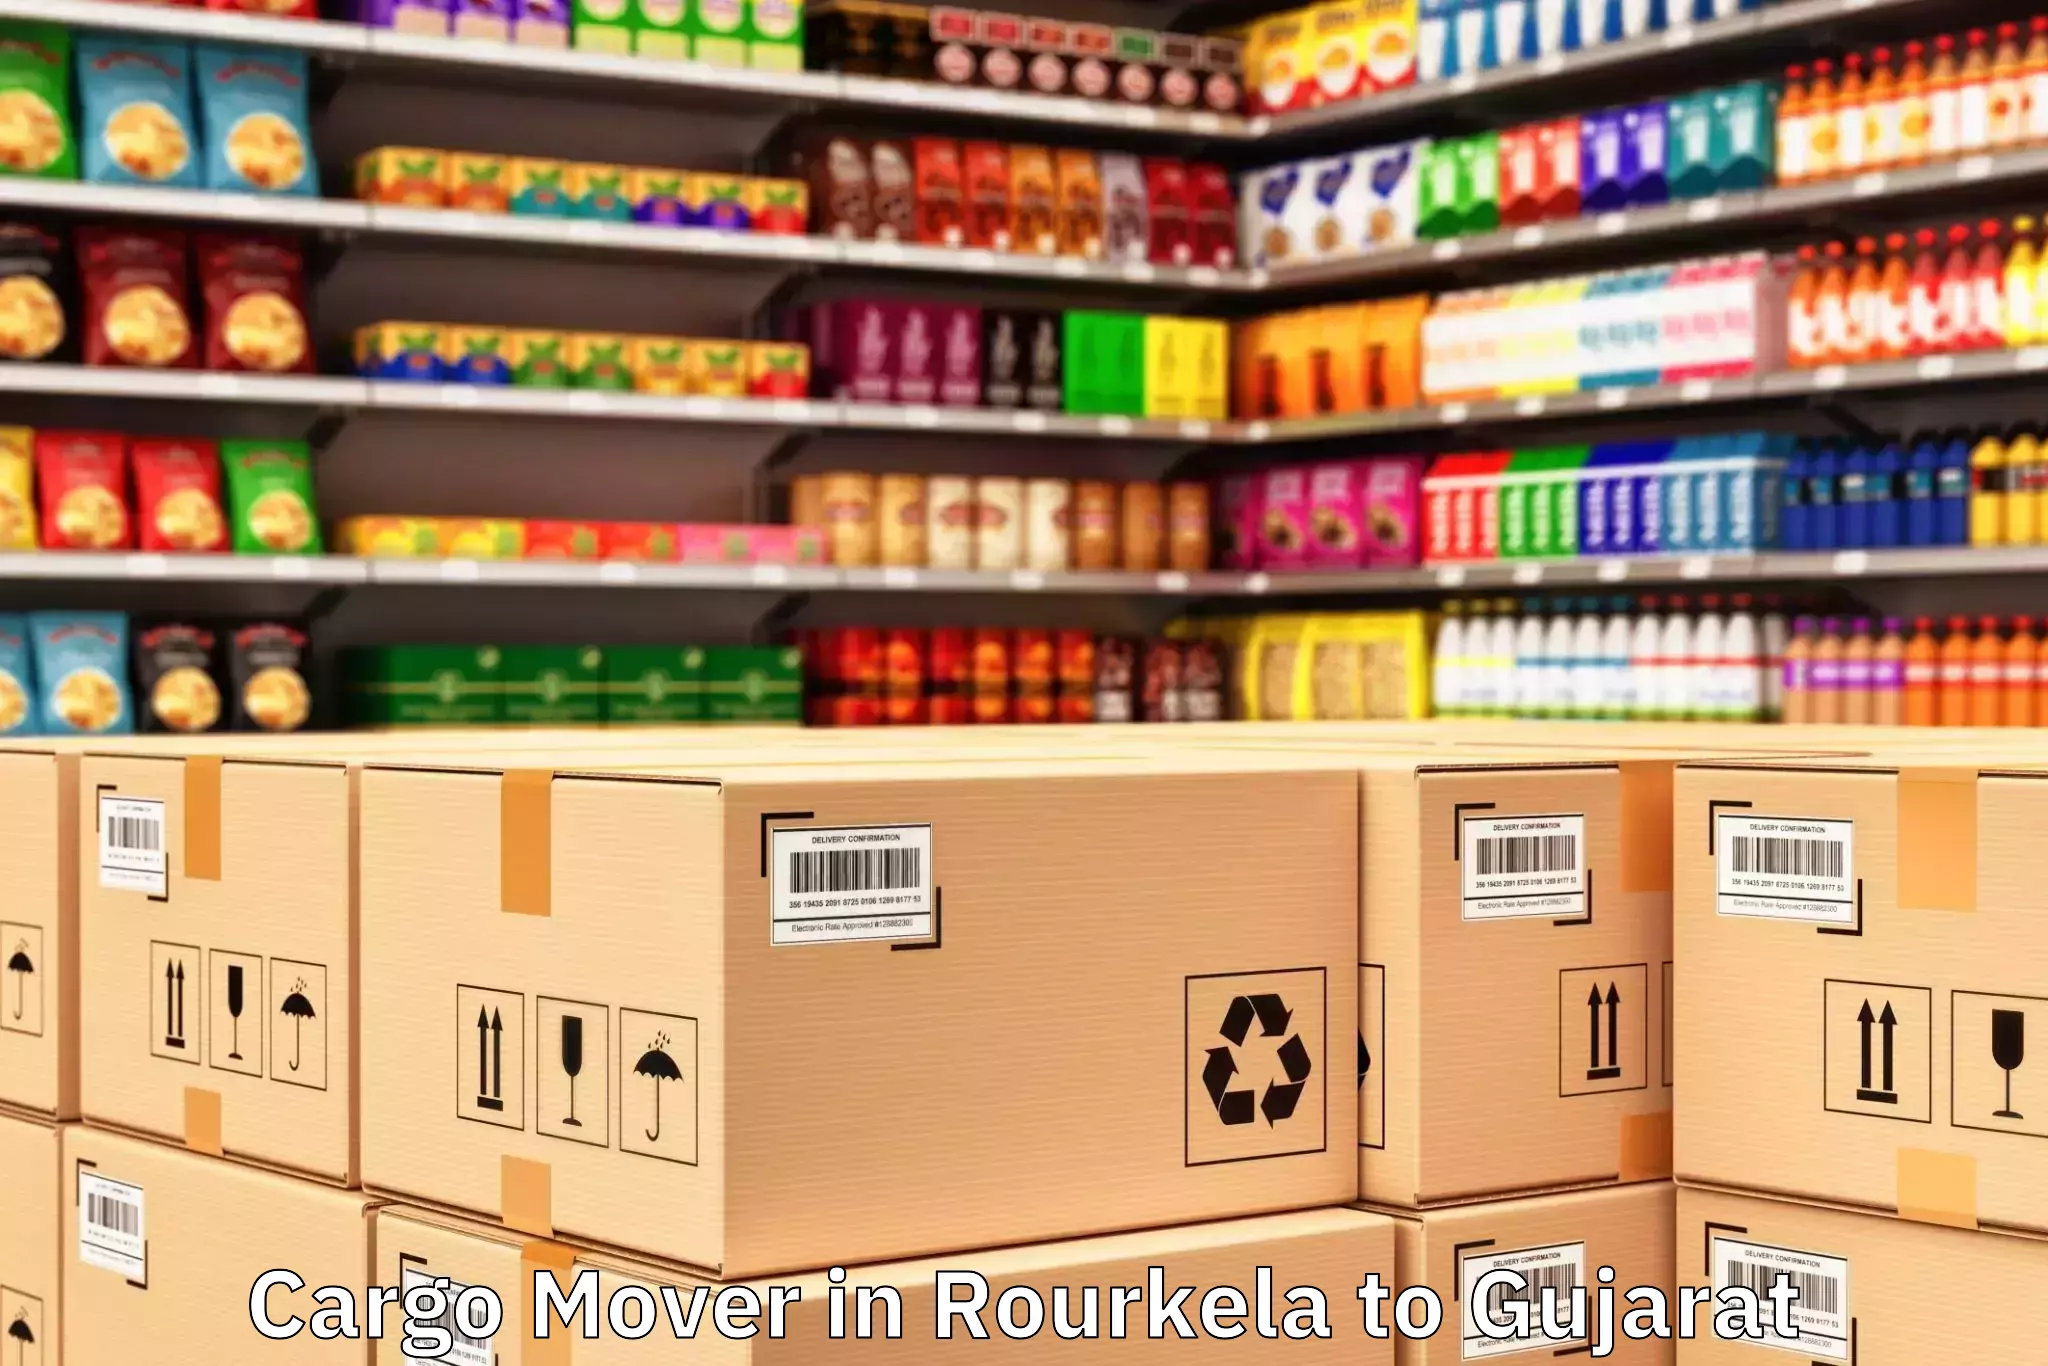 Top Rourkela to Kandla Port Cargo Mover Available